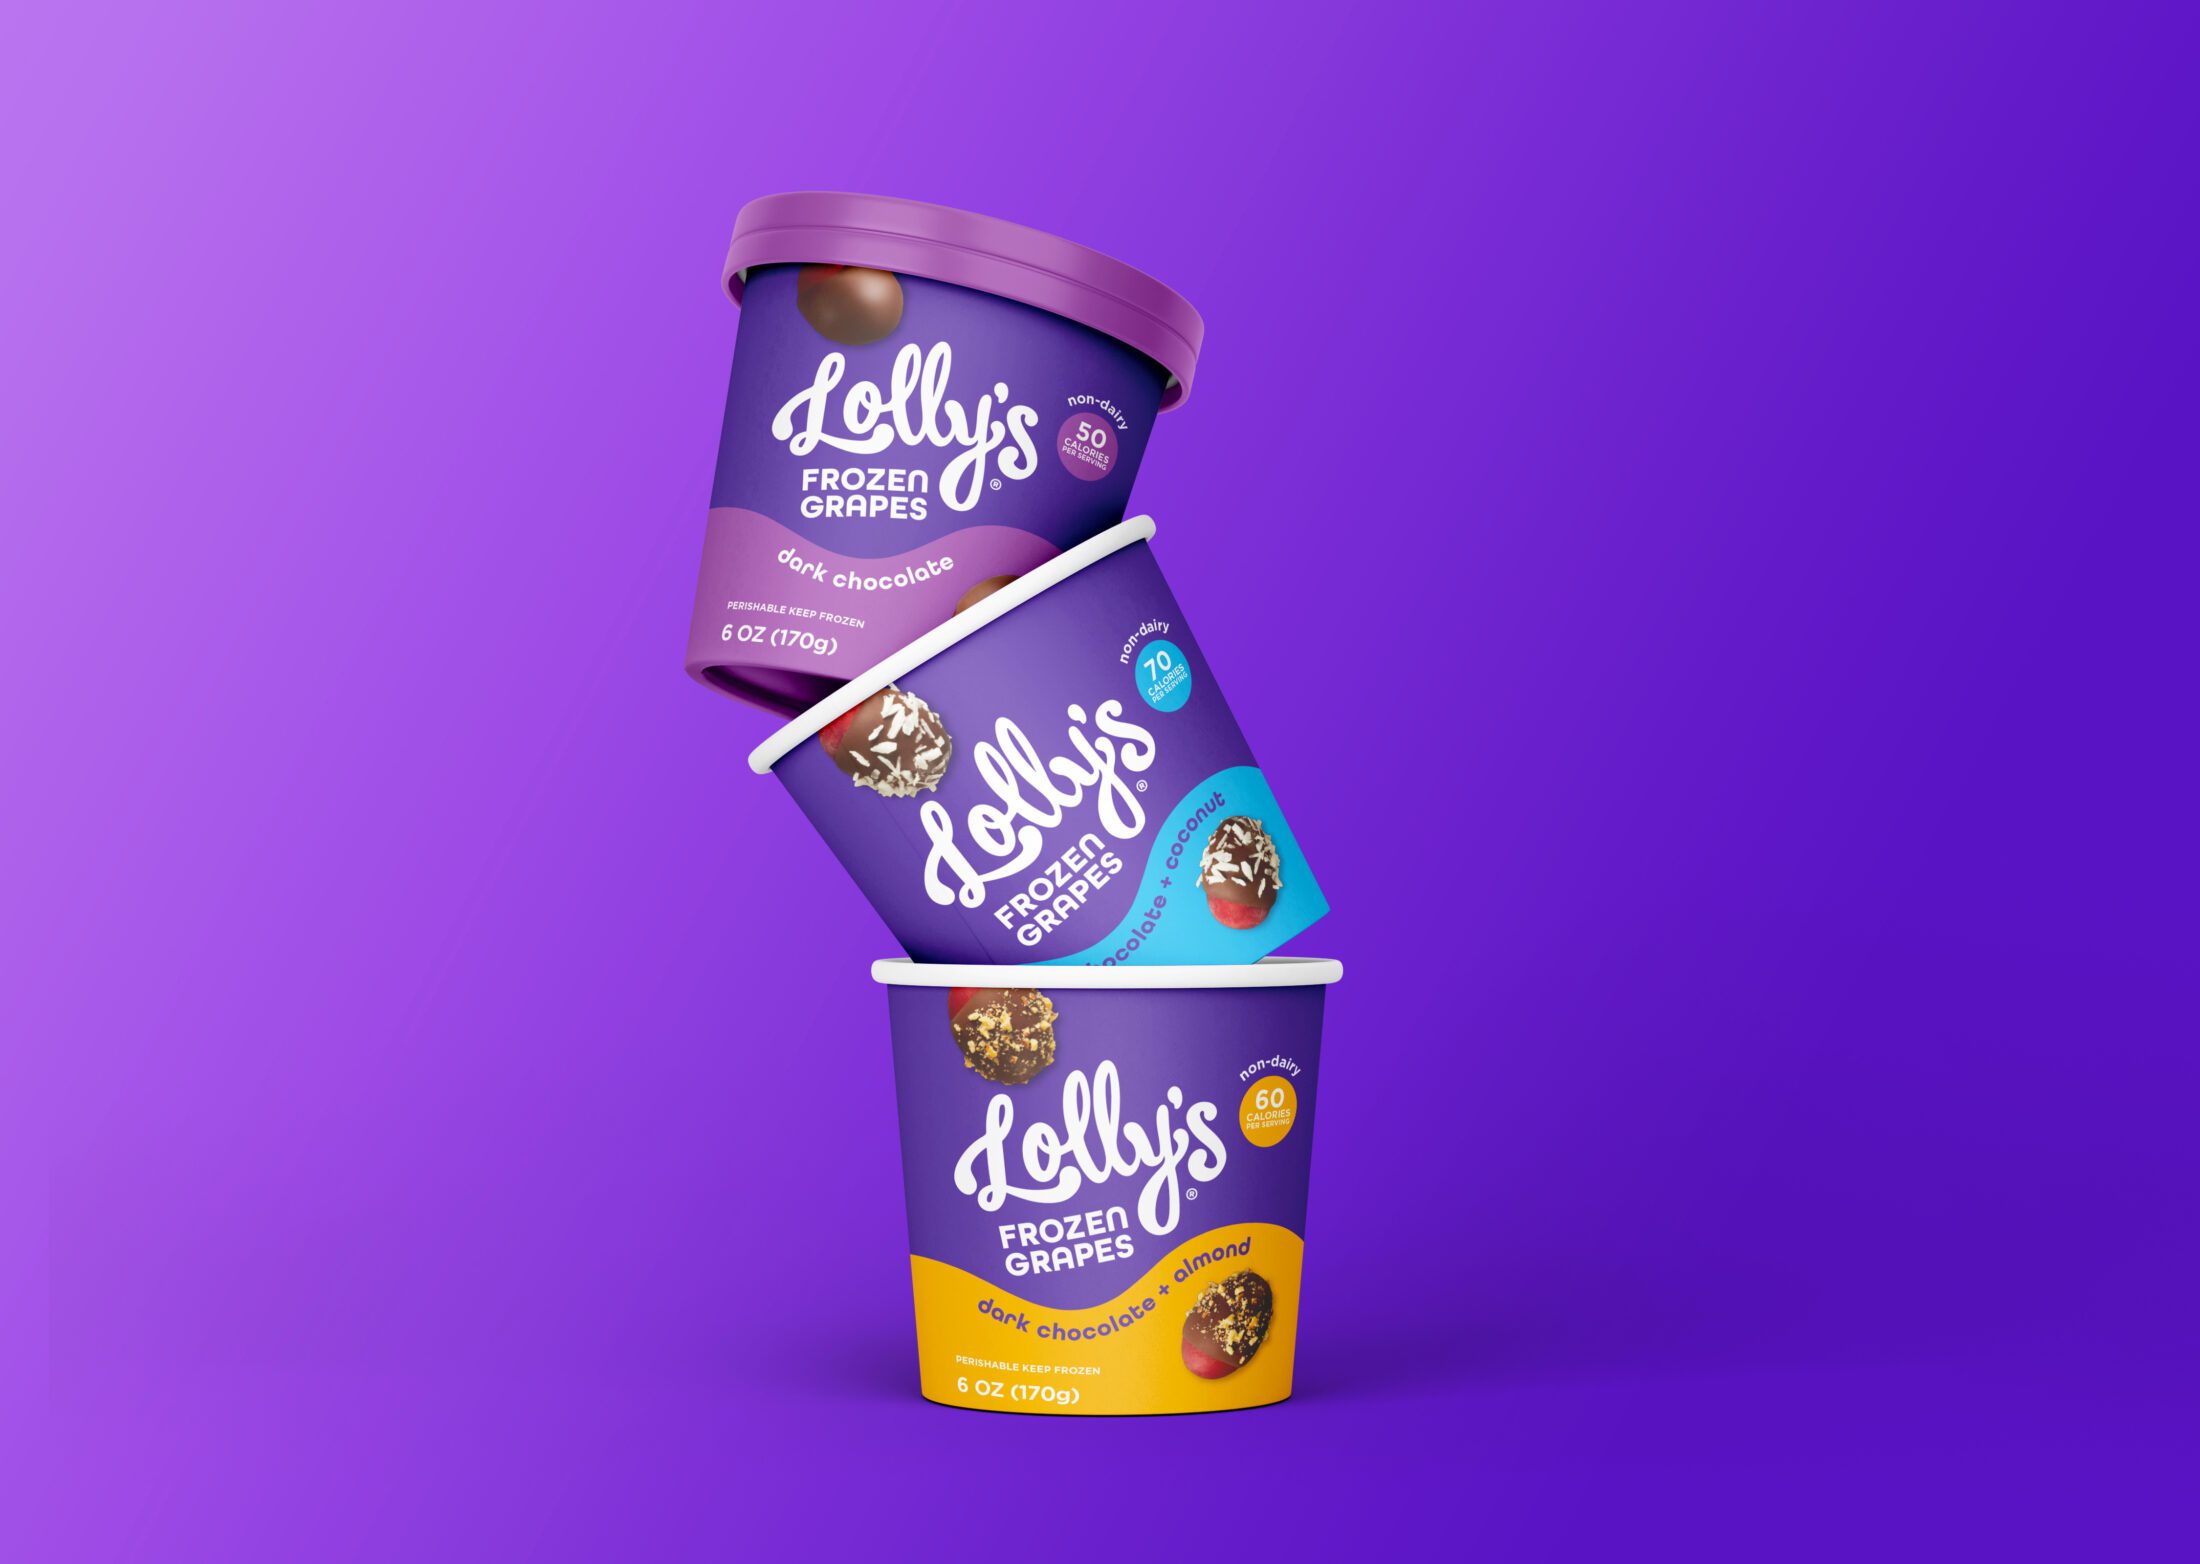 Three off-center stacked tubs of Lolly's Frozen Grape flavors, listed from top to bottom: Dark Chocolate, Dark Chocolate + Coconut, and Dark Chocolate + Almond on a gradient purple backgound.